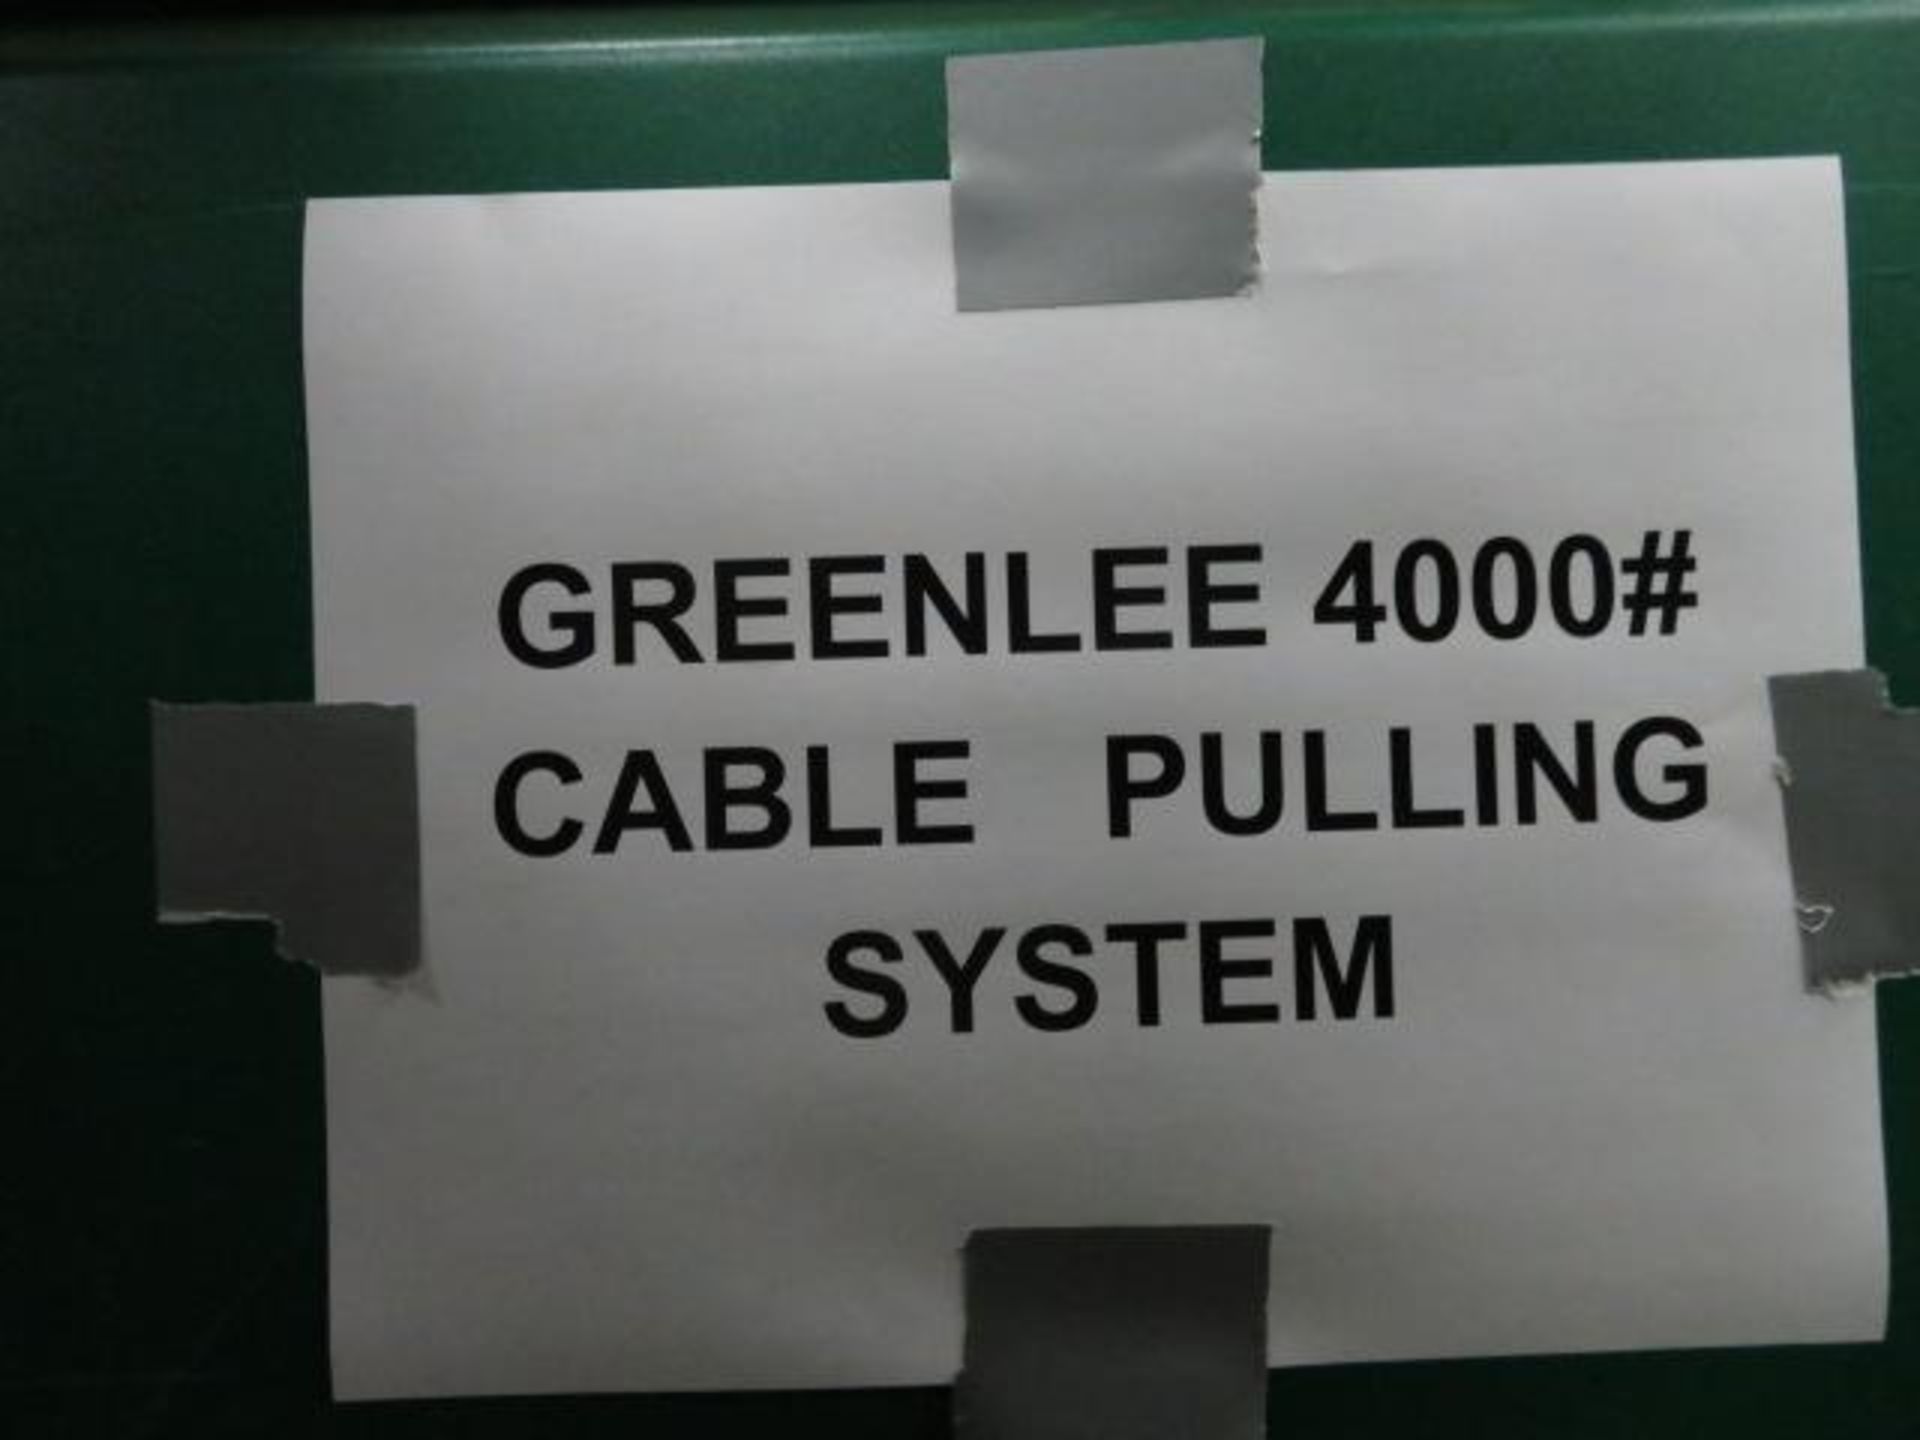 LOT: Greenlee 4000 lb. Hydraulic Cable Pulling System No. 686, with Portable Case - Image 3 of 3